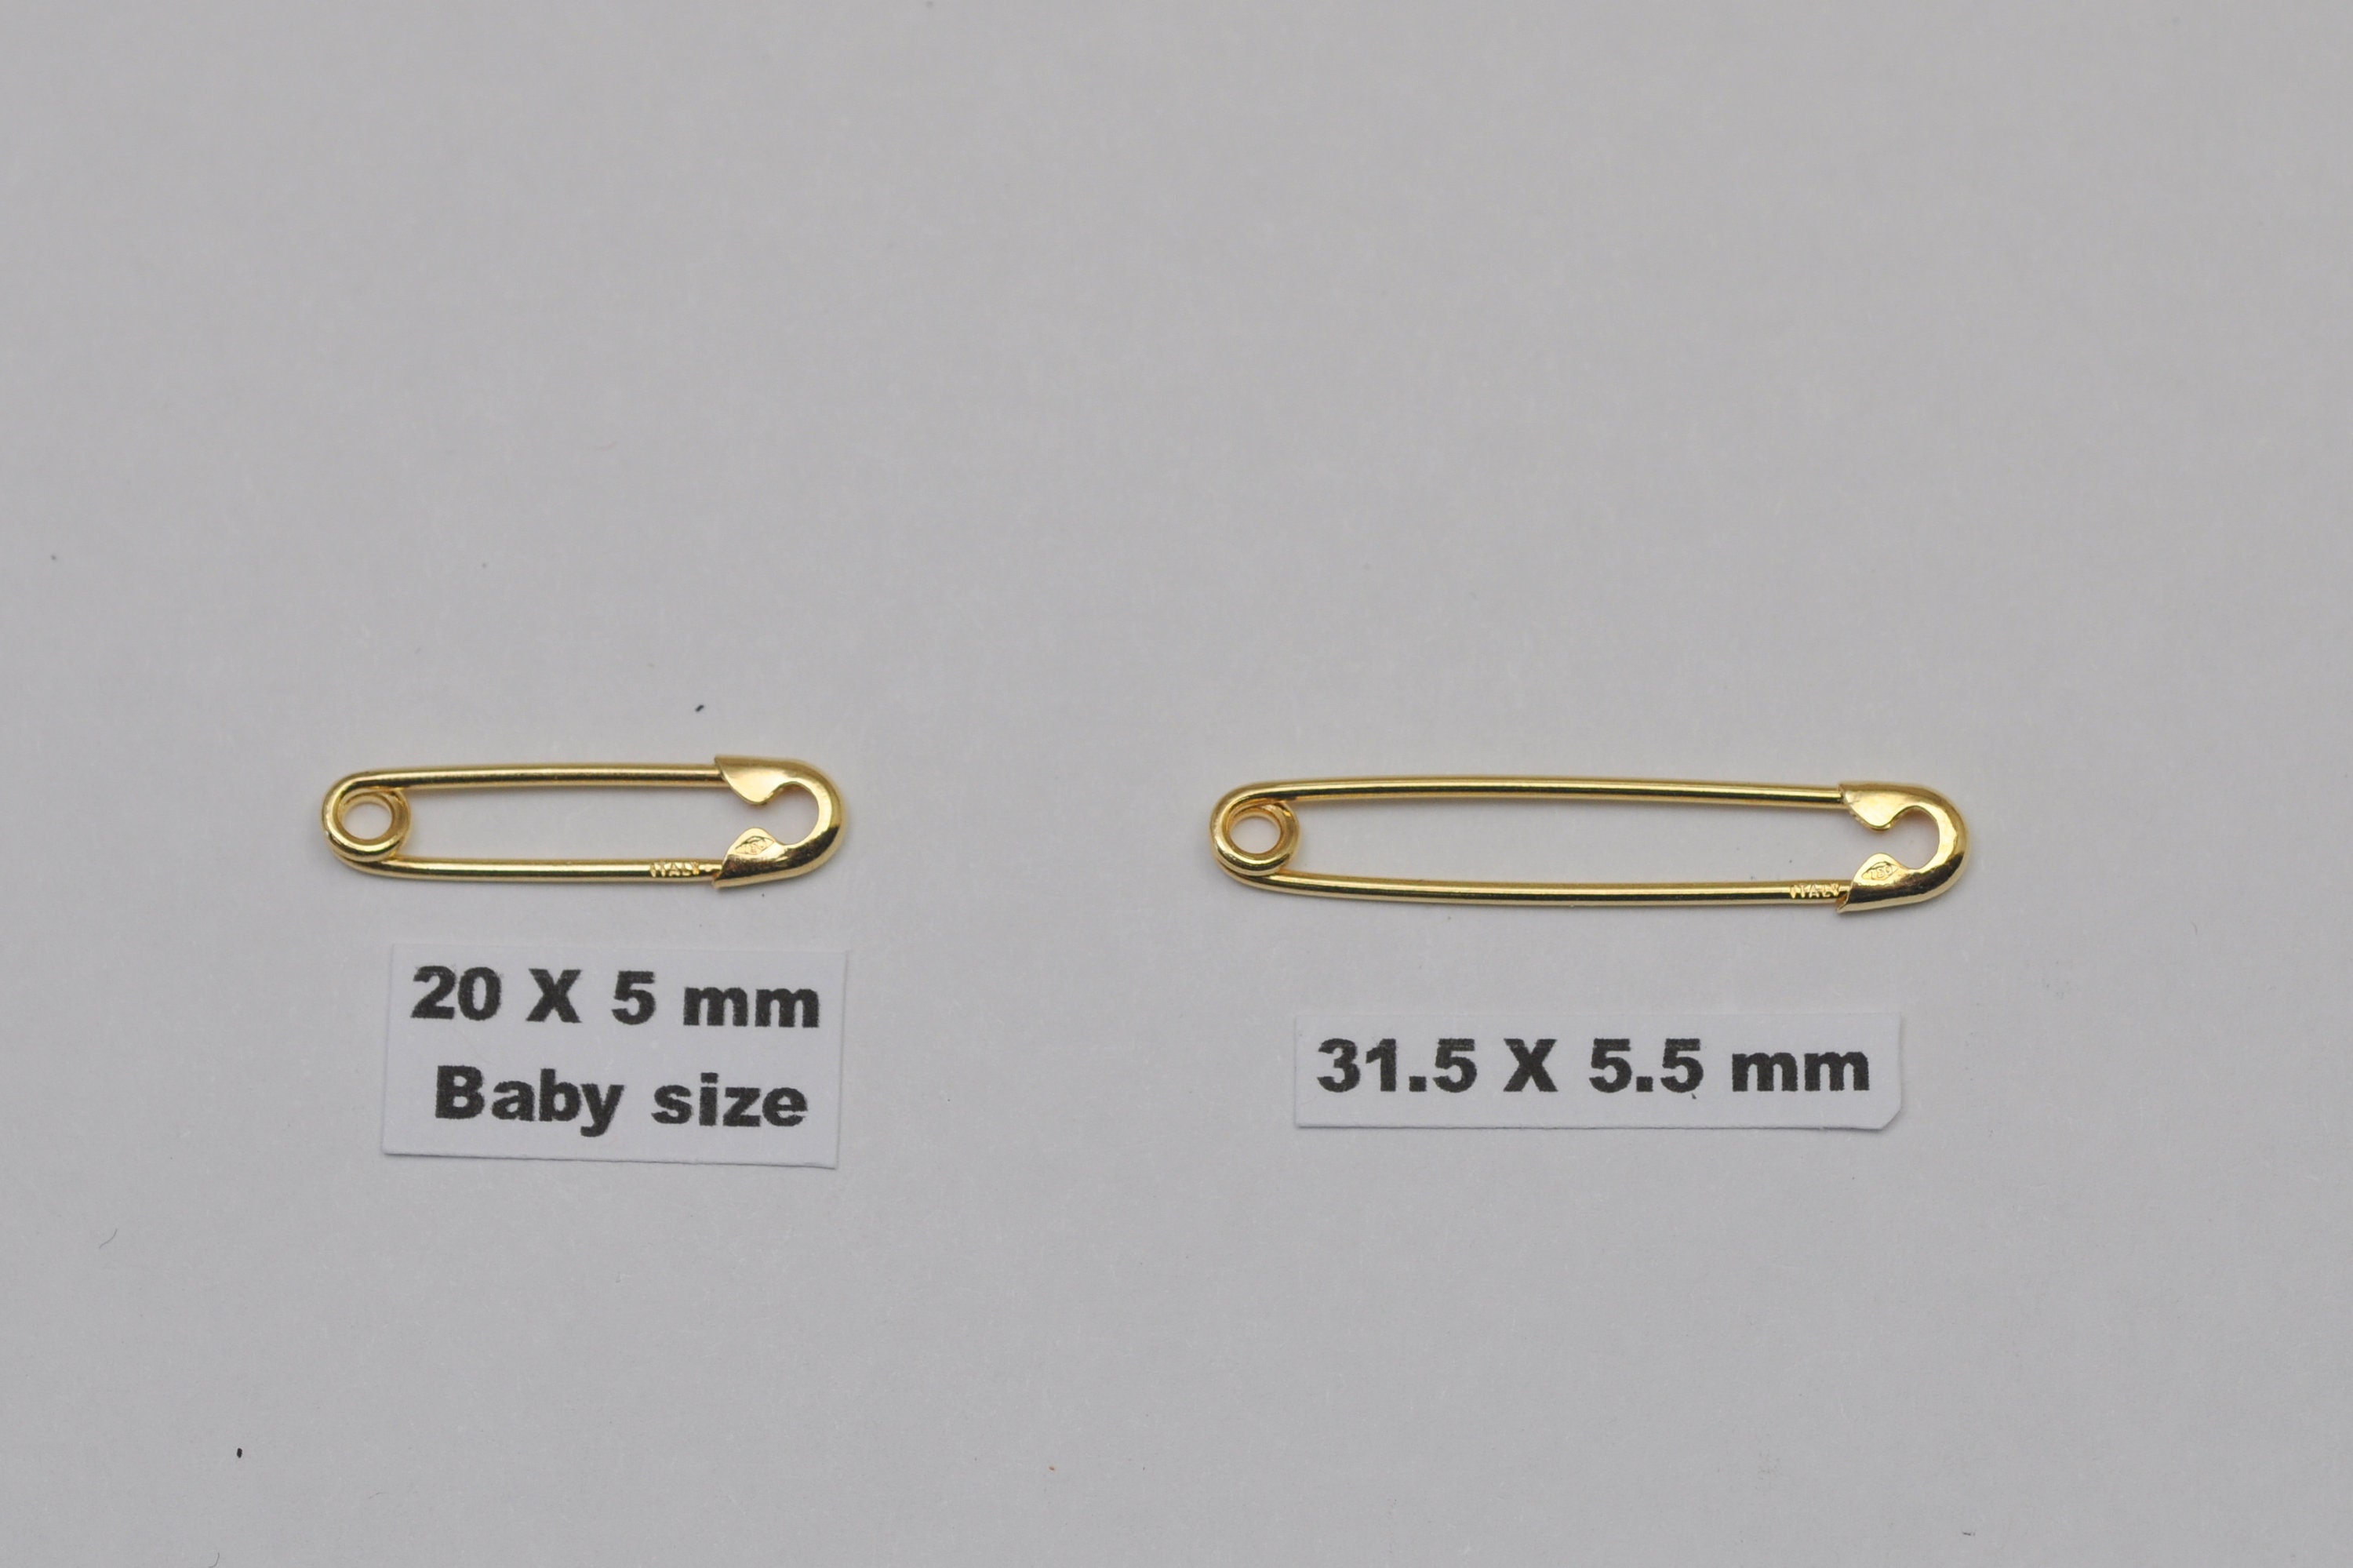 18K Gold Plated Safety Pins, Hobby Lobby